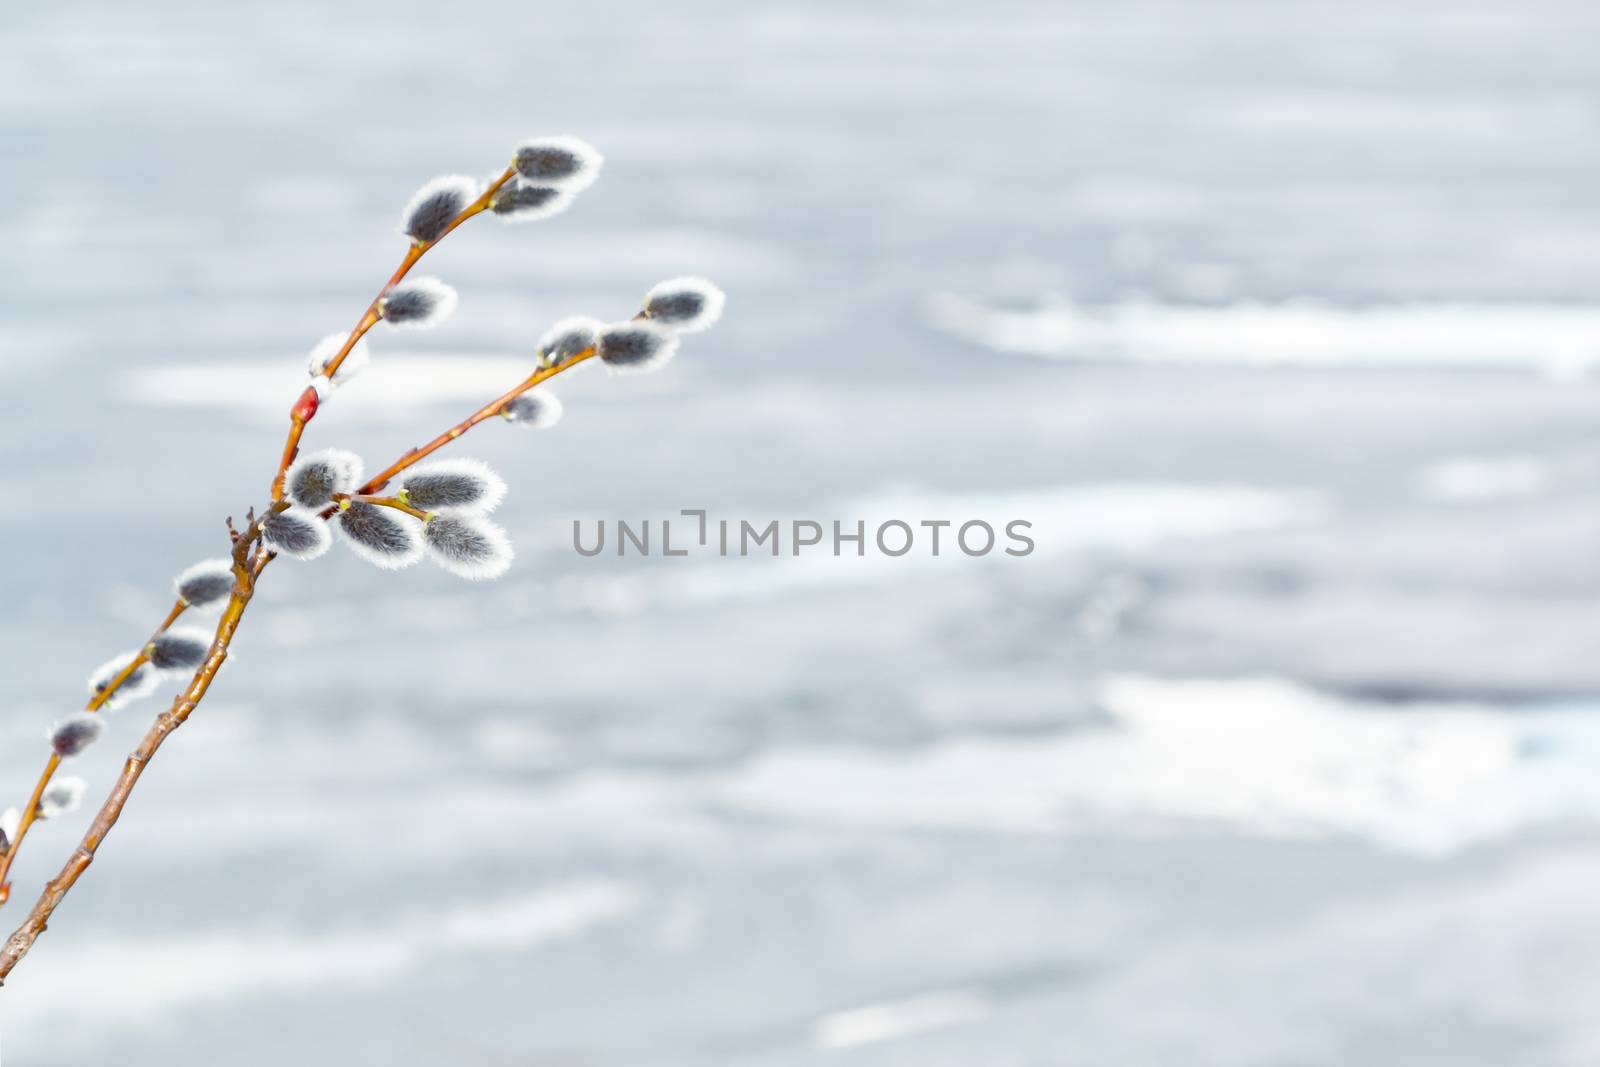 Willow twig on the background of melting ice on the lake in early spring - spring background and season change concept, place for text, copy space by galsand